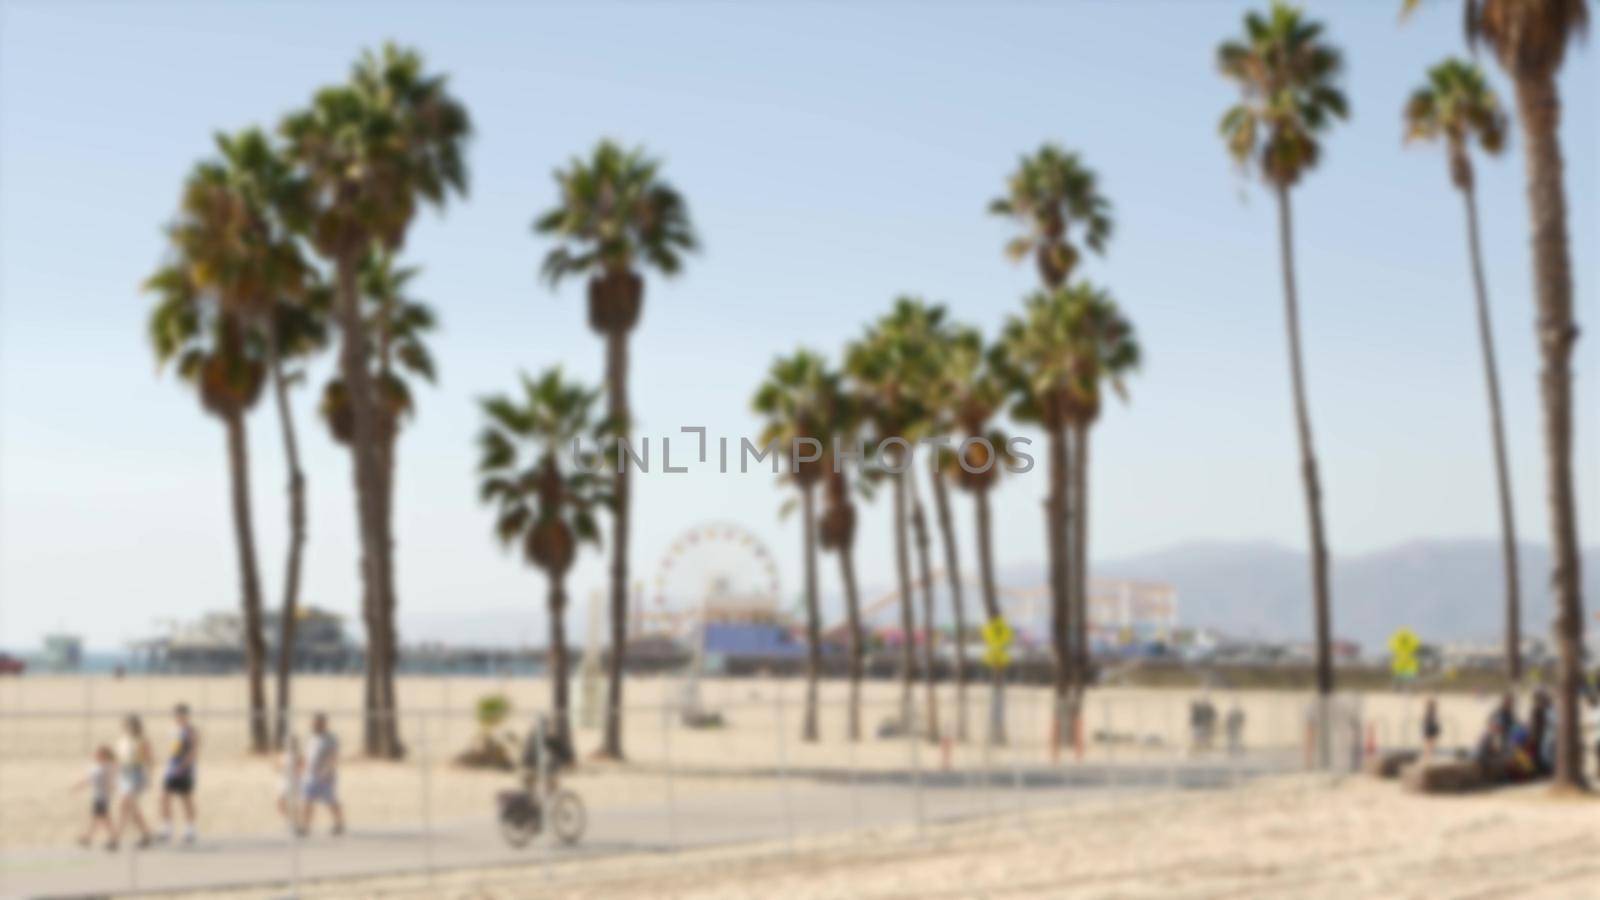 California beach aesthetic, people ride cycles on a bicycle path. Blurred, defocused background. Amusement park on pier and palms in Santa Monica american pacific ocean resort, Los Angeles CA USA by DogoraSun